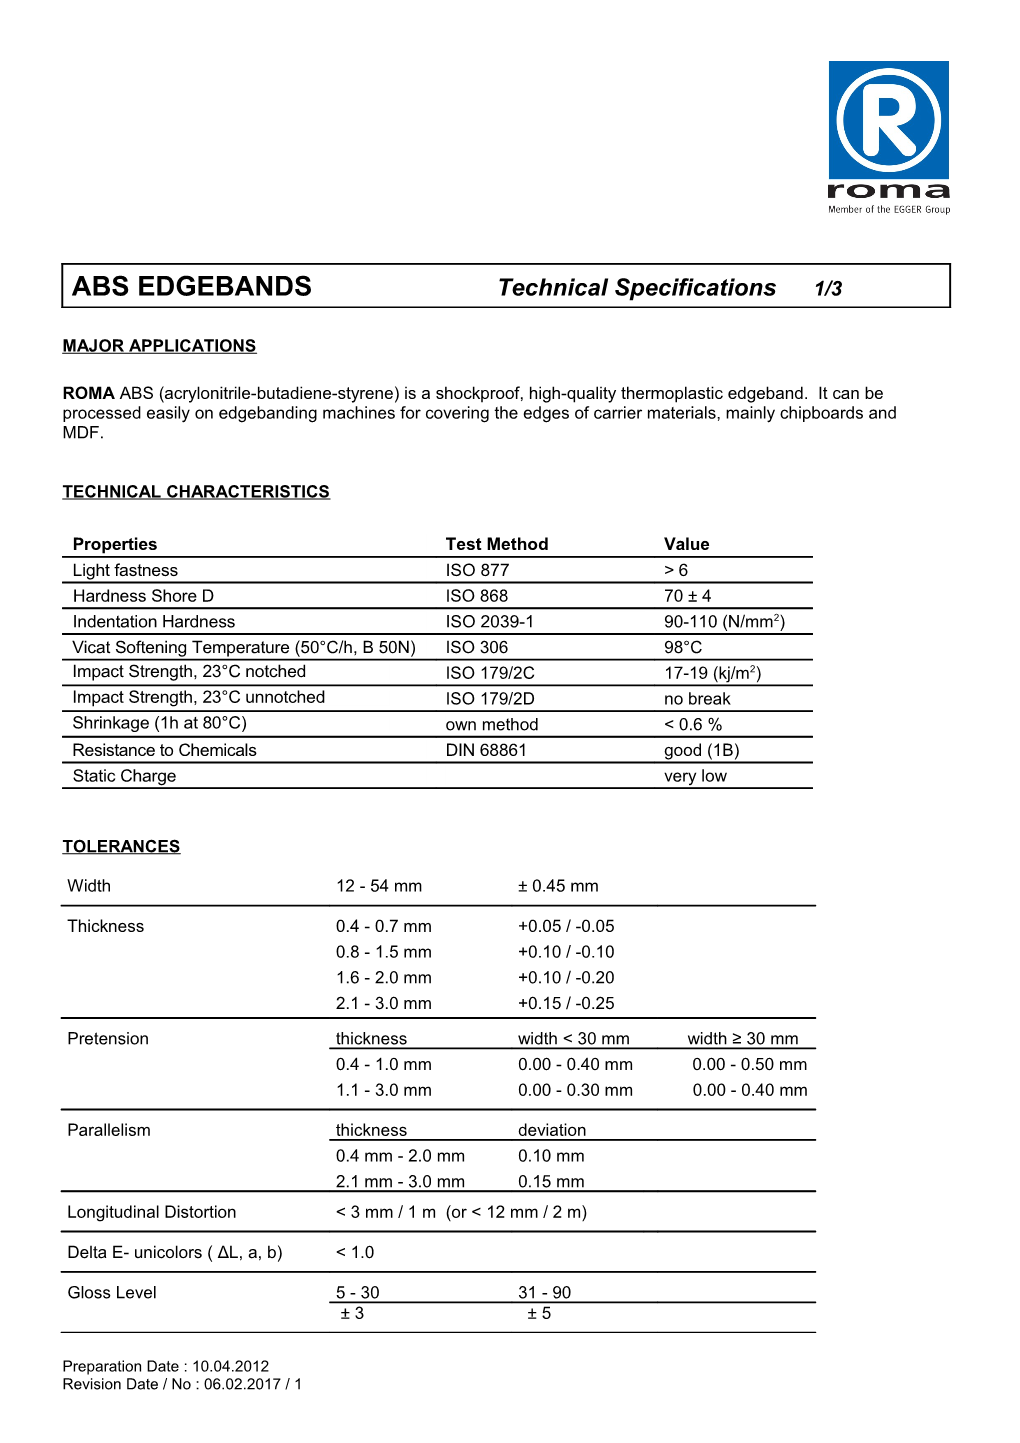 ABS Edgebandstechnical Specifications 1/3